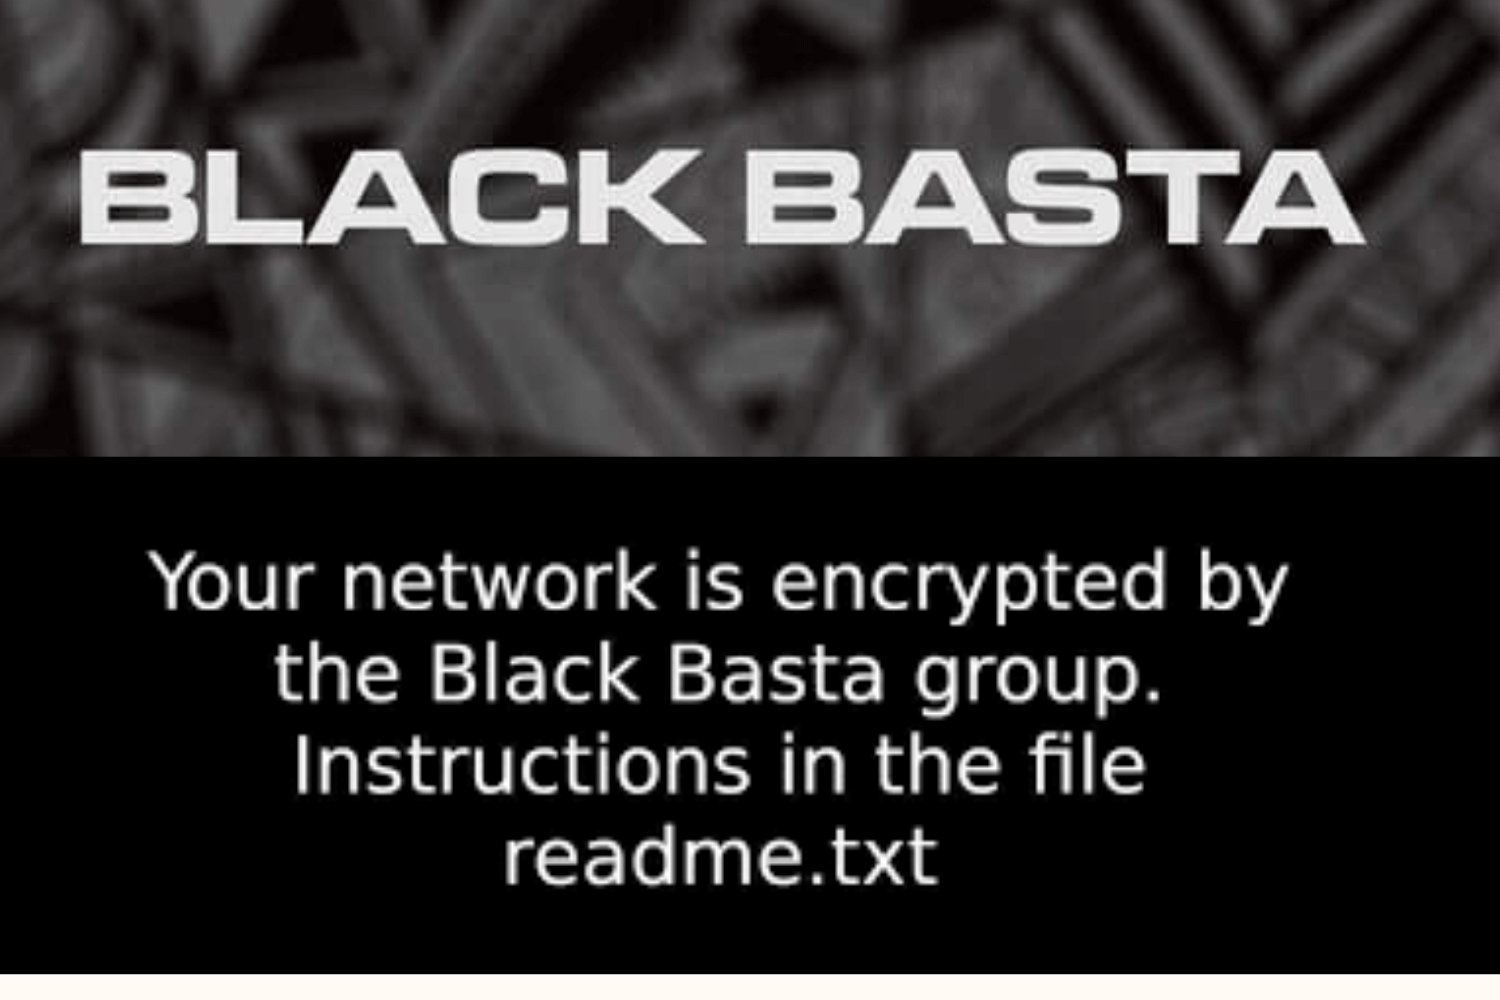 Researchers Release a Free Decryptor for Black Basta Ransomware